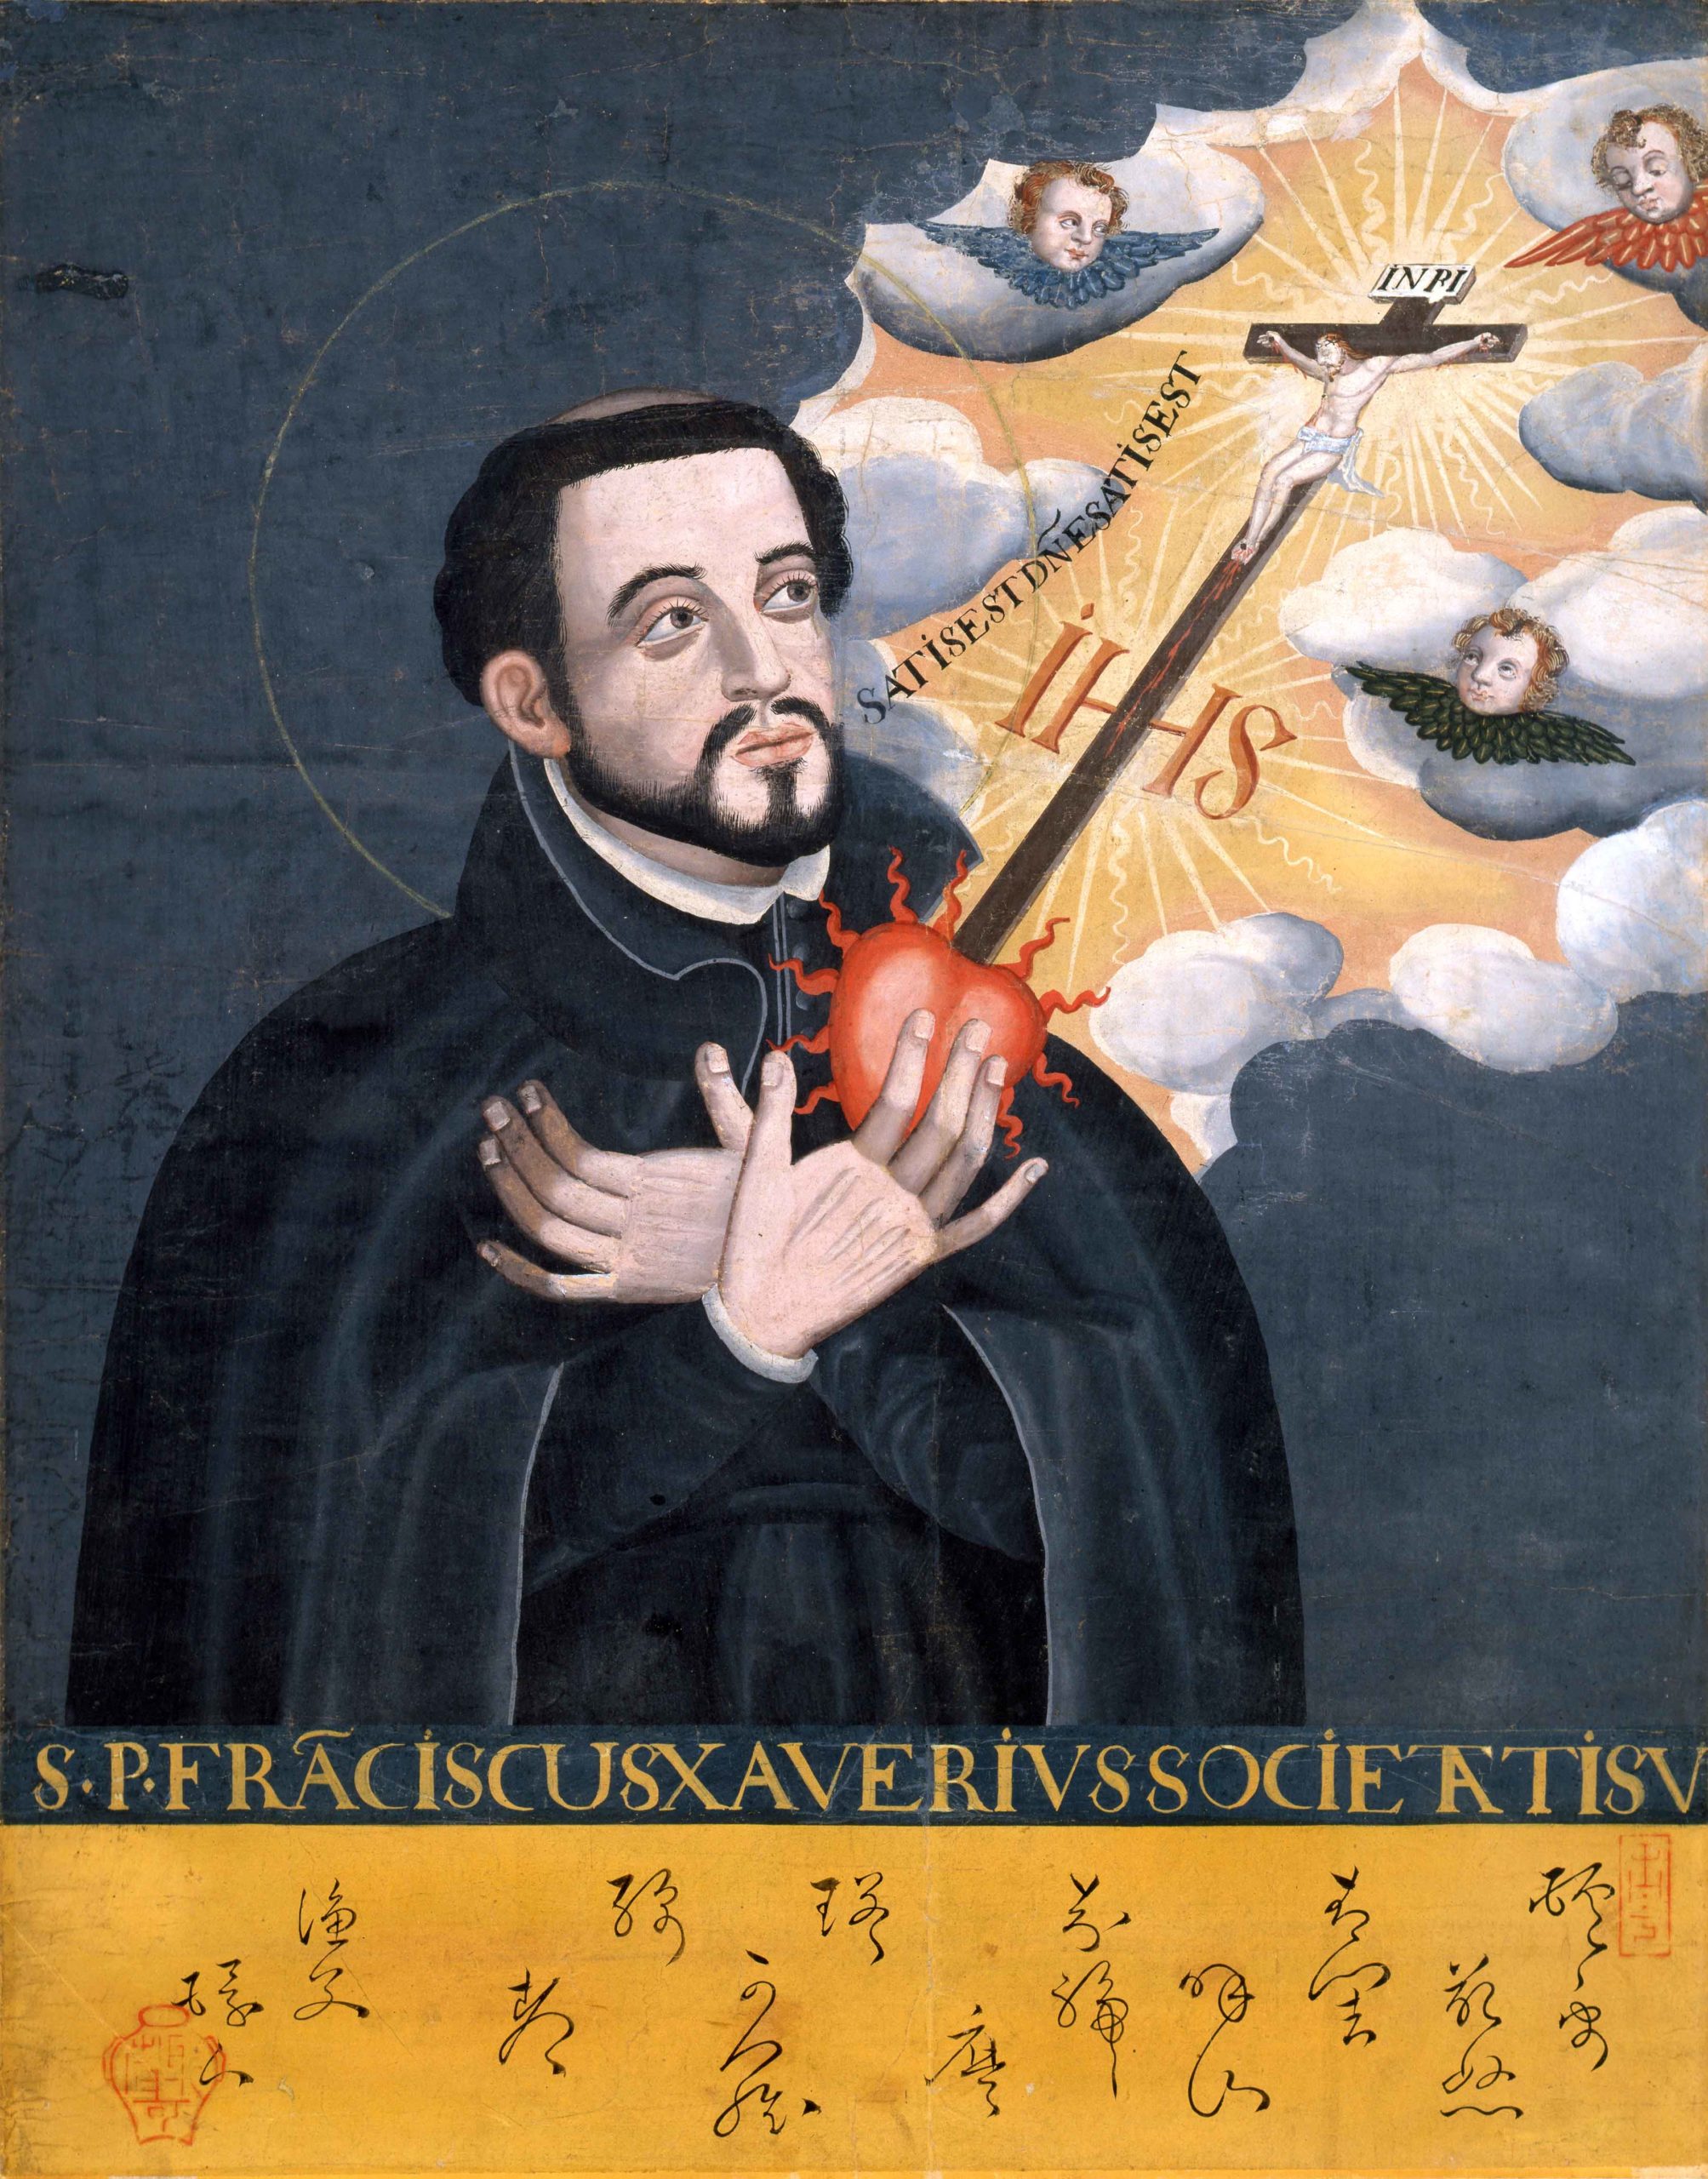 Unknown Japanese painter, St. Francis Xavier, late sixteenth to early seventeenth centuries, Japanese watercolors on paper, 23.8 x 19 inches, Kobe City Museum (Photo: Wikimedia Commons)